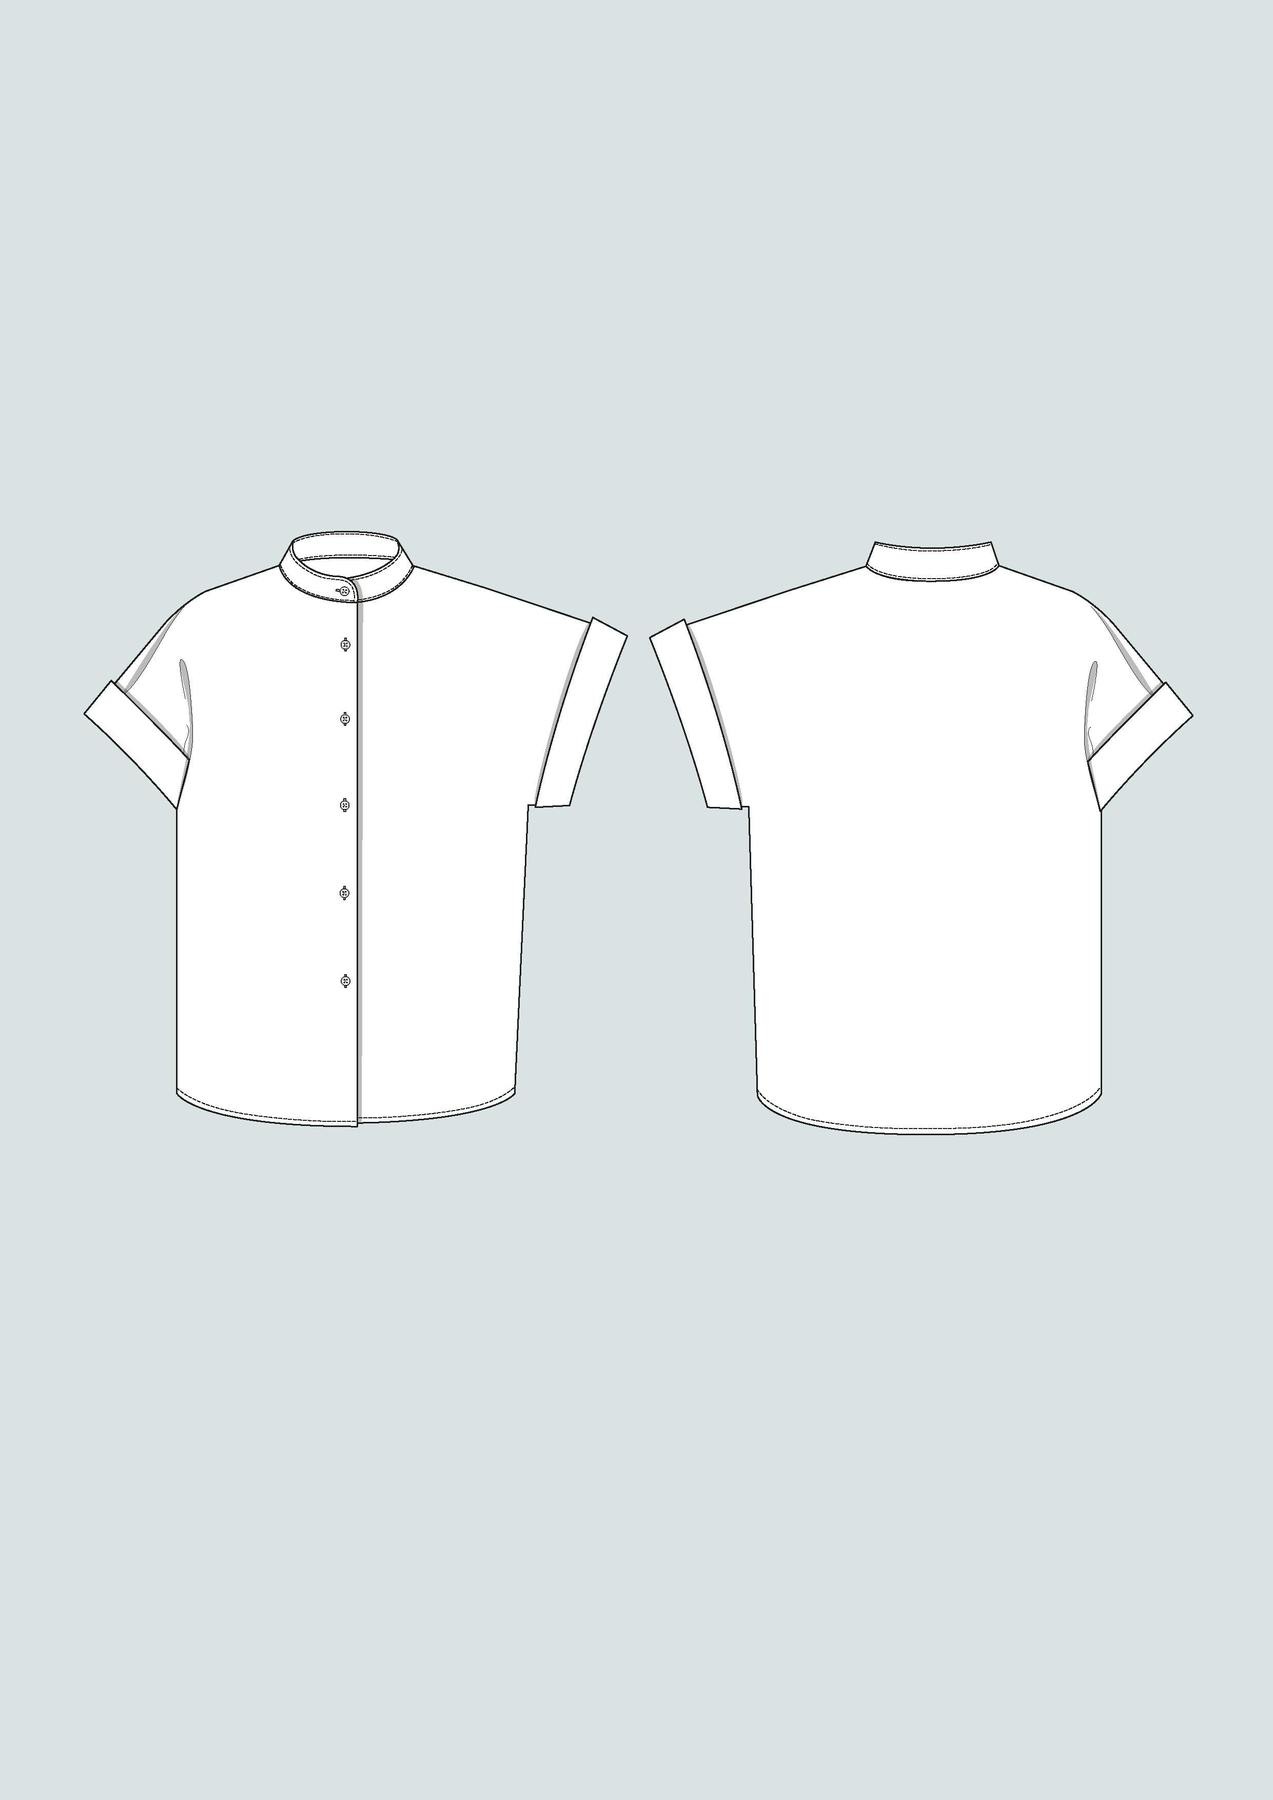 The Assembly Line Patterns Cap Sleeve Shirt XS-L pattern by The Assembly Line Patterns